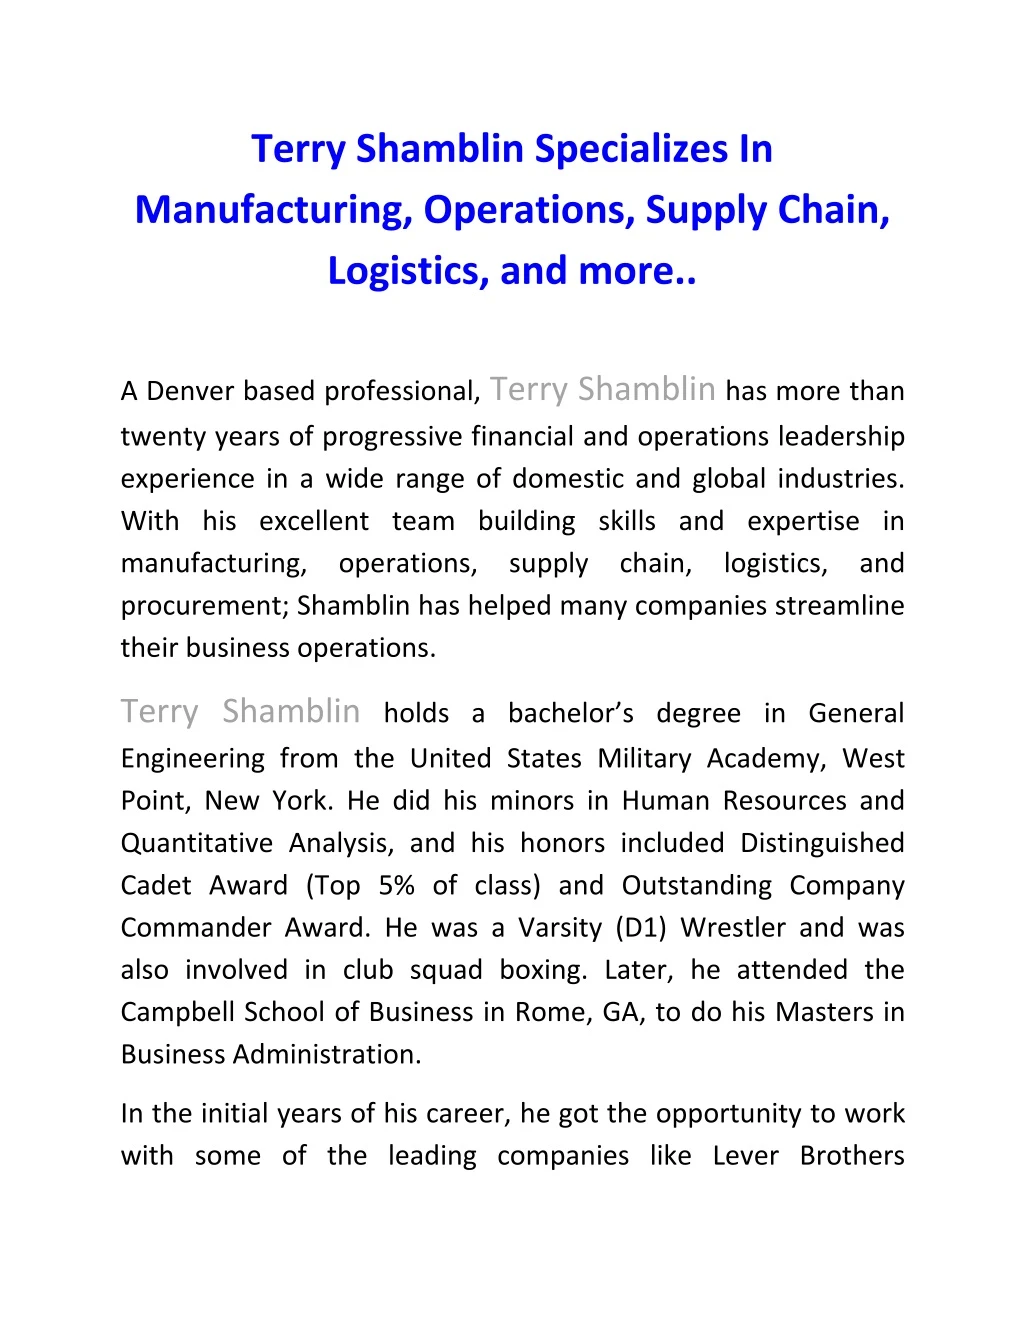 terry shamblin specializes in manufacturing